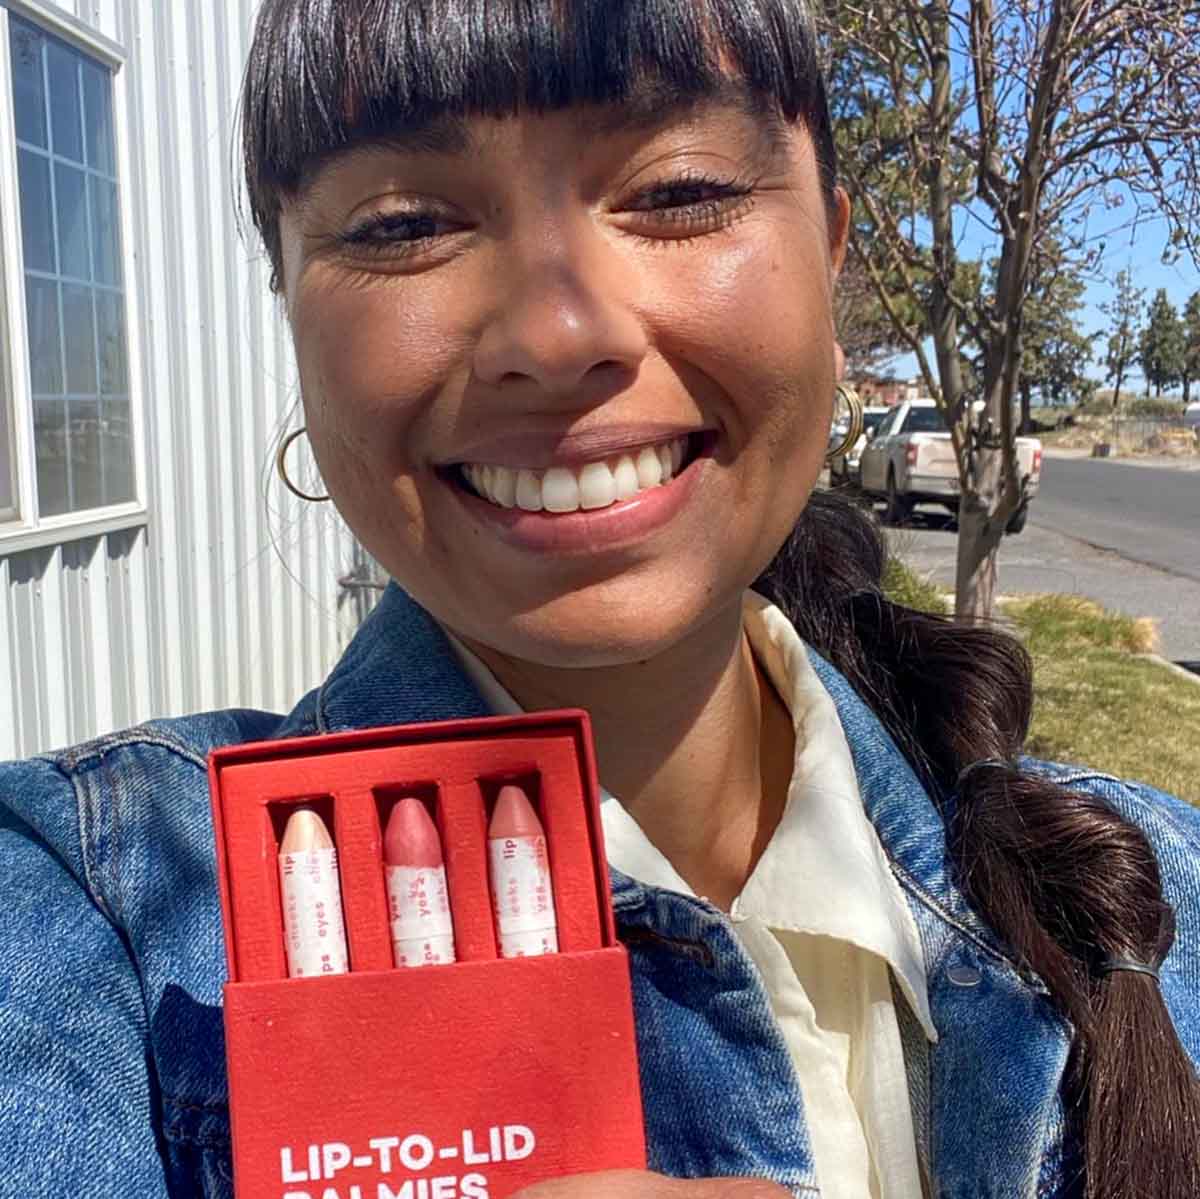 Ericka, founder of the sustainable small beauty company Axiology, holds her product in front of her while smiling for a selfie on the street.